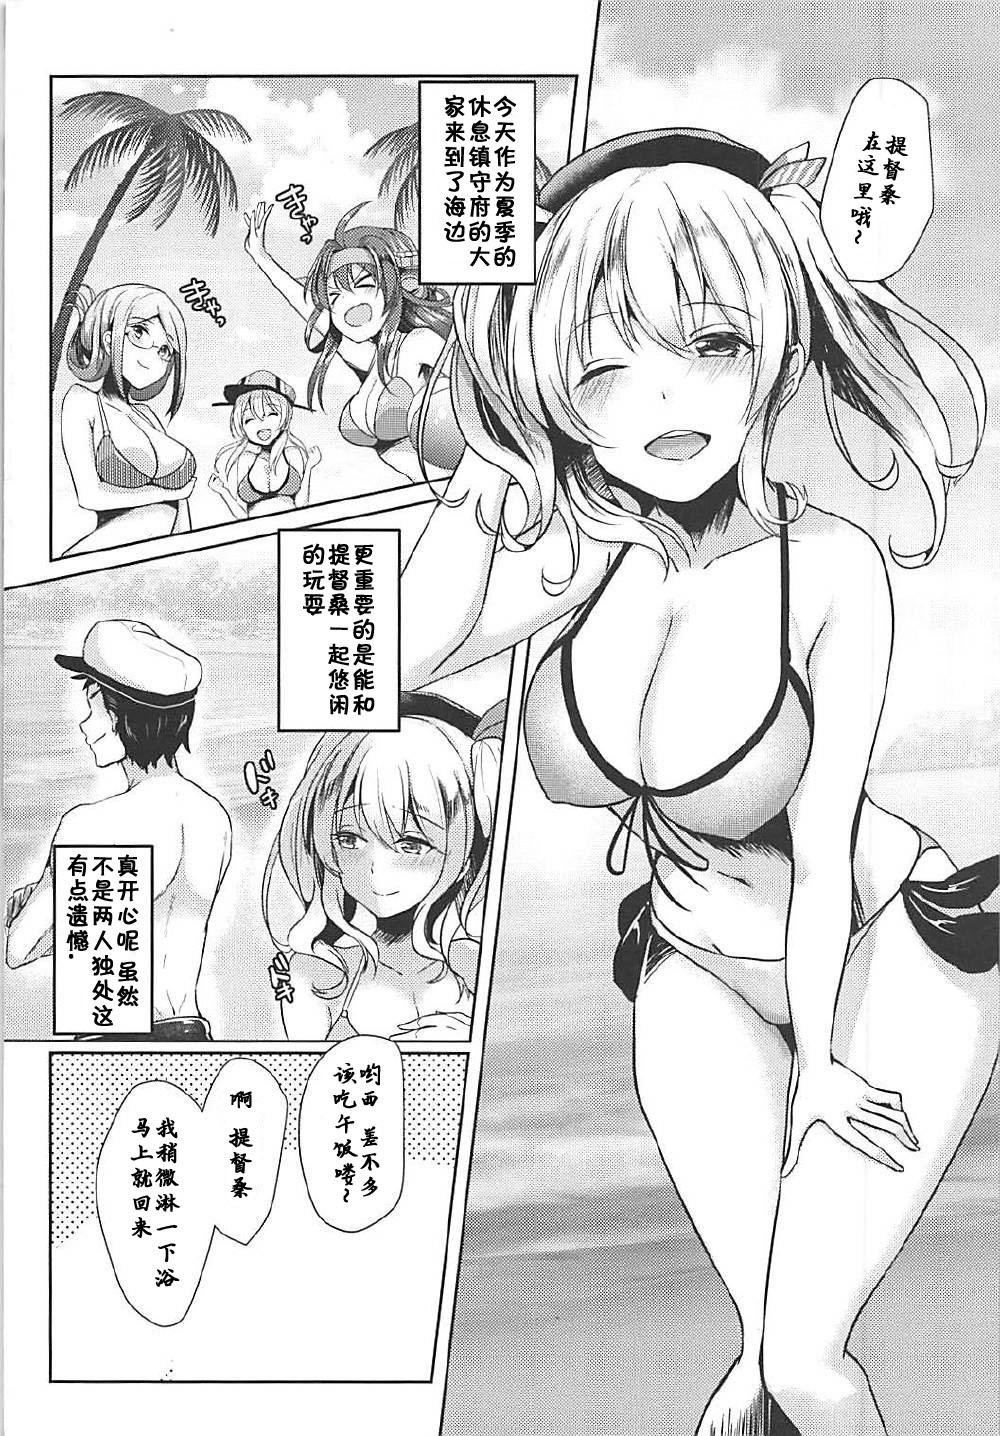 Extreme Shower Room ni Gochuui o - Shower Room Please Note - Kantai collection Chaturbate - Page 3